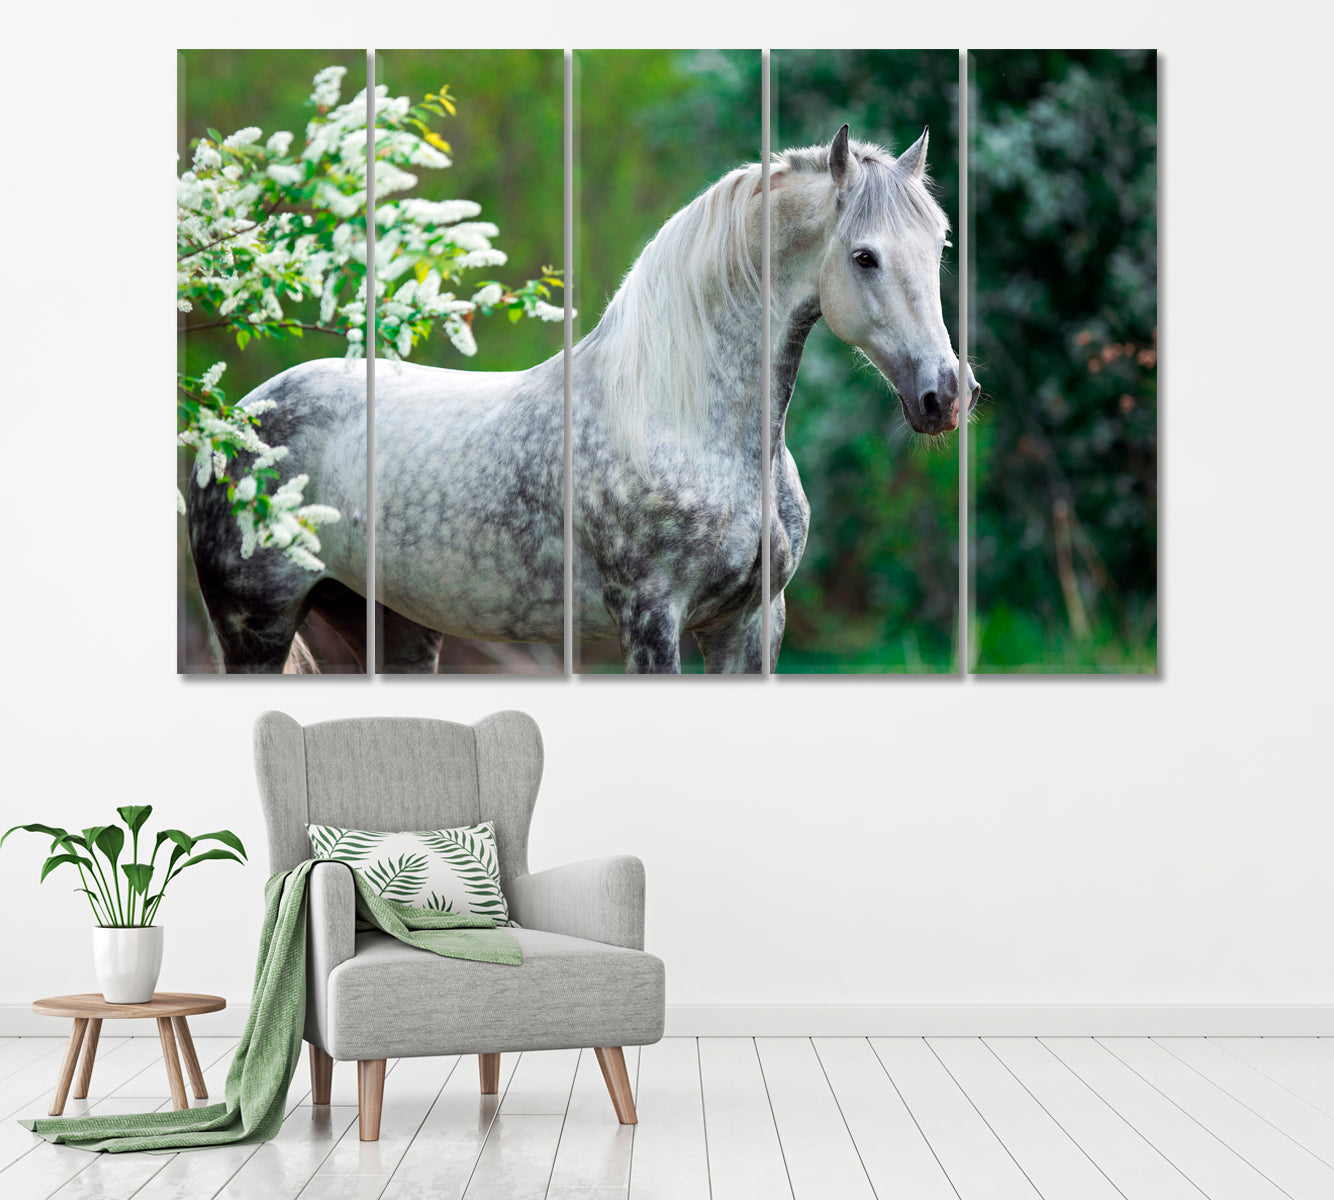 Gray Horse in Flowers Canvas Print ArtLexy 5 Panels 36"x24" inches 